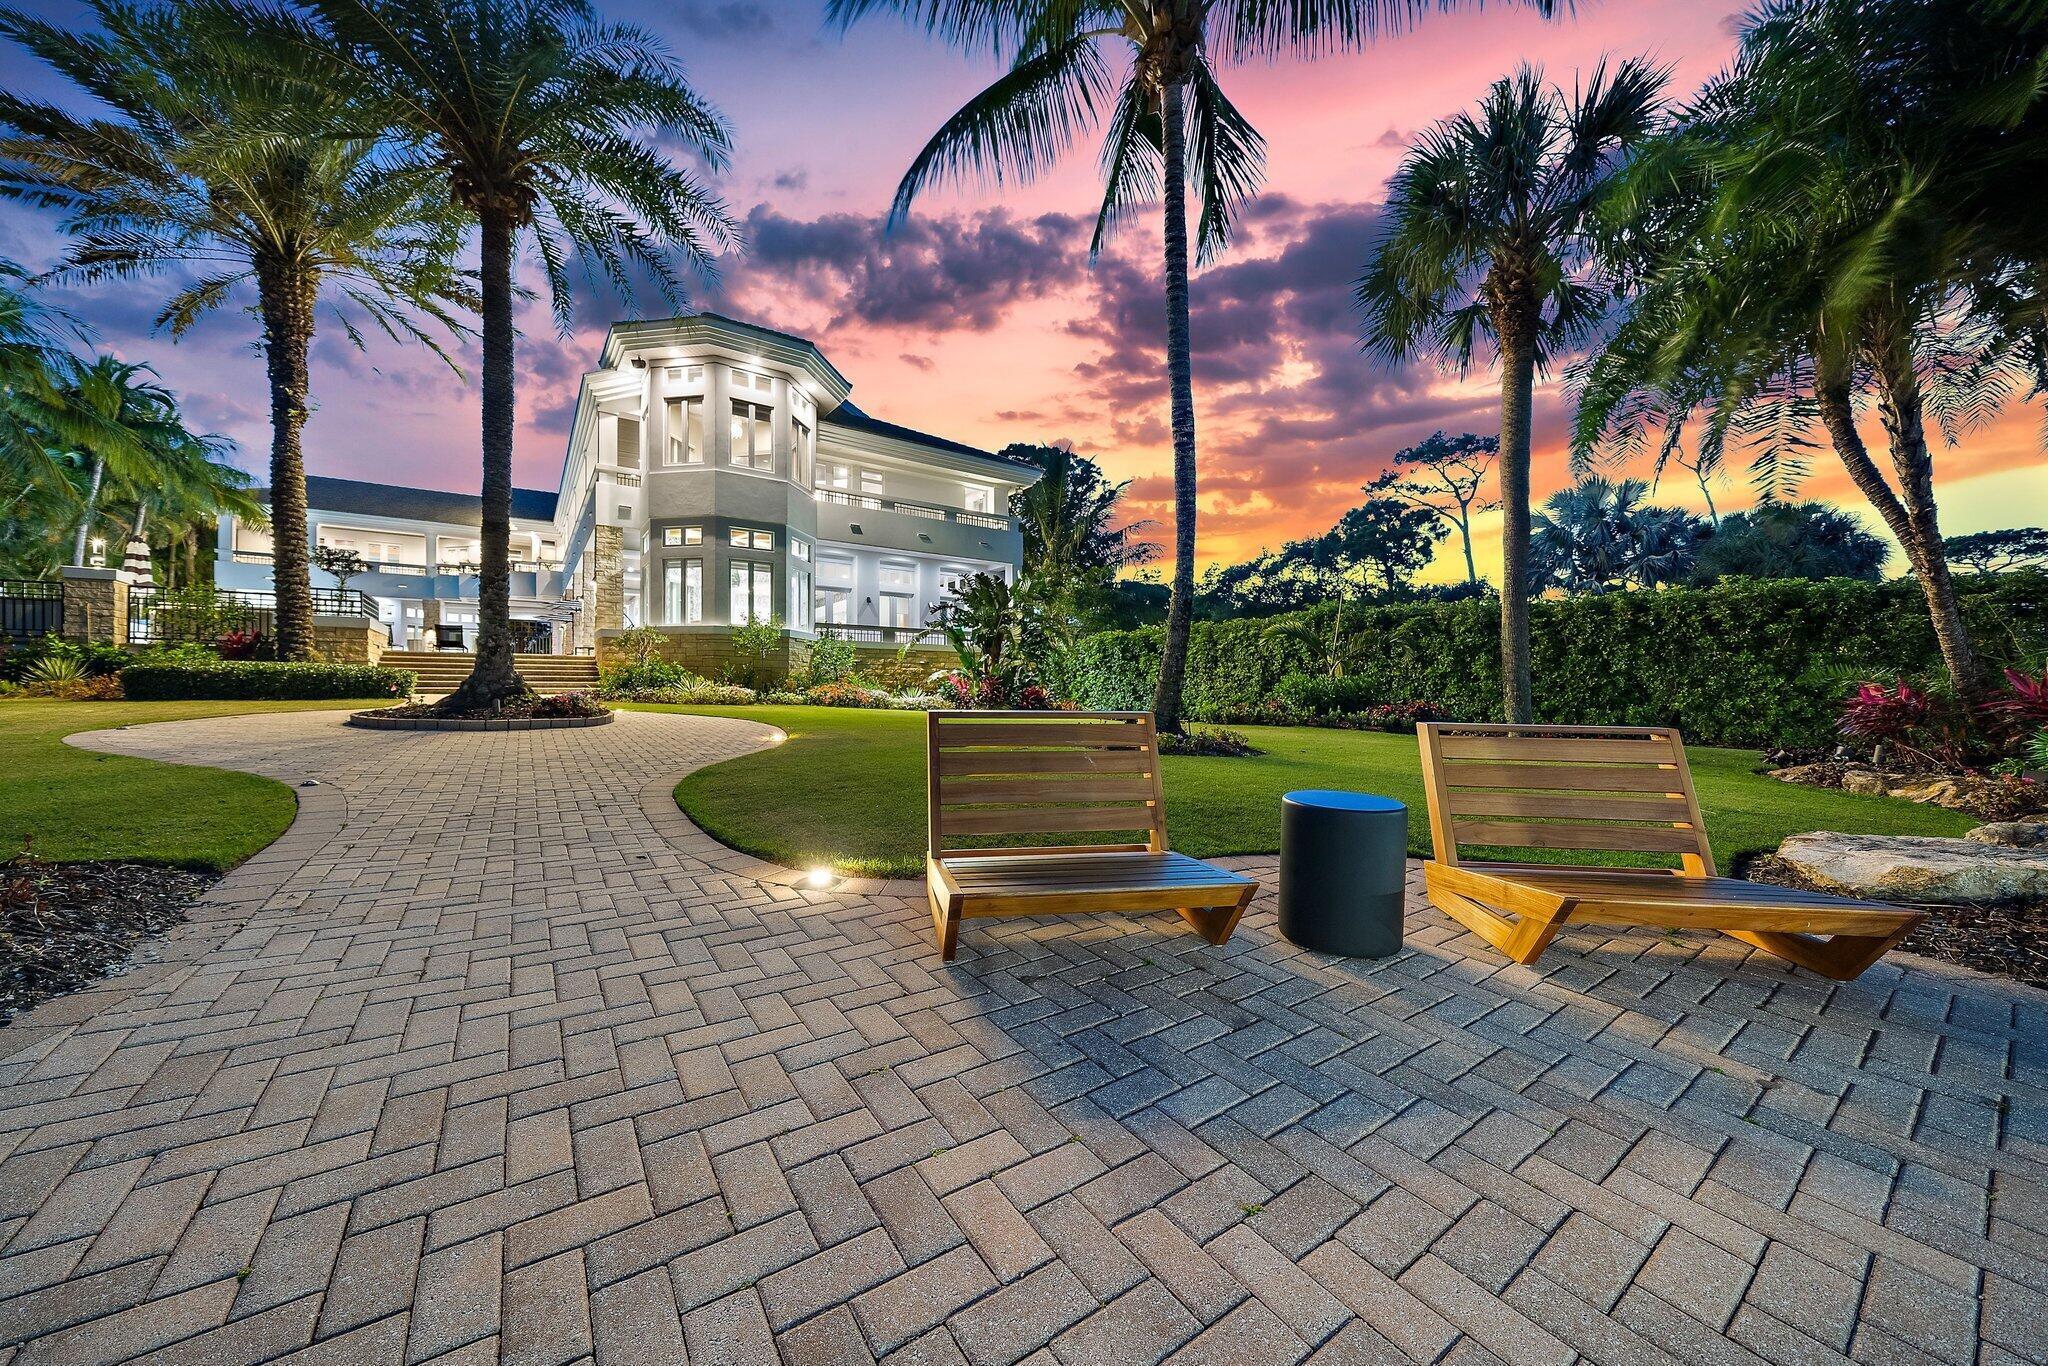 Where can you find an eight bedroom, nine bath home with over 9,300 SF of AC space, four garages, directly on the Intracoastal Waterway with 105 feet of frontage in Palm Beach Gardens on a 1.55 acre site? It's here, and it could be yours!